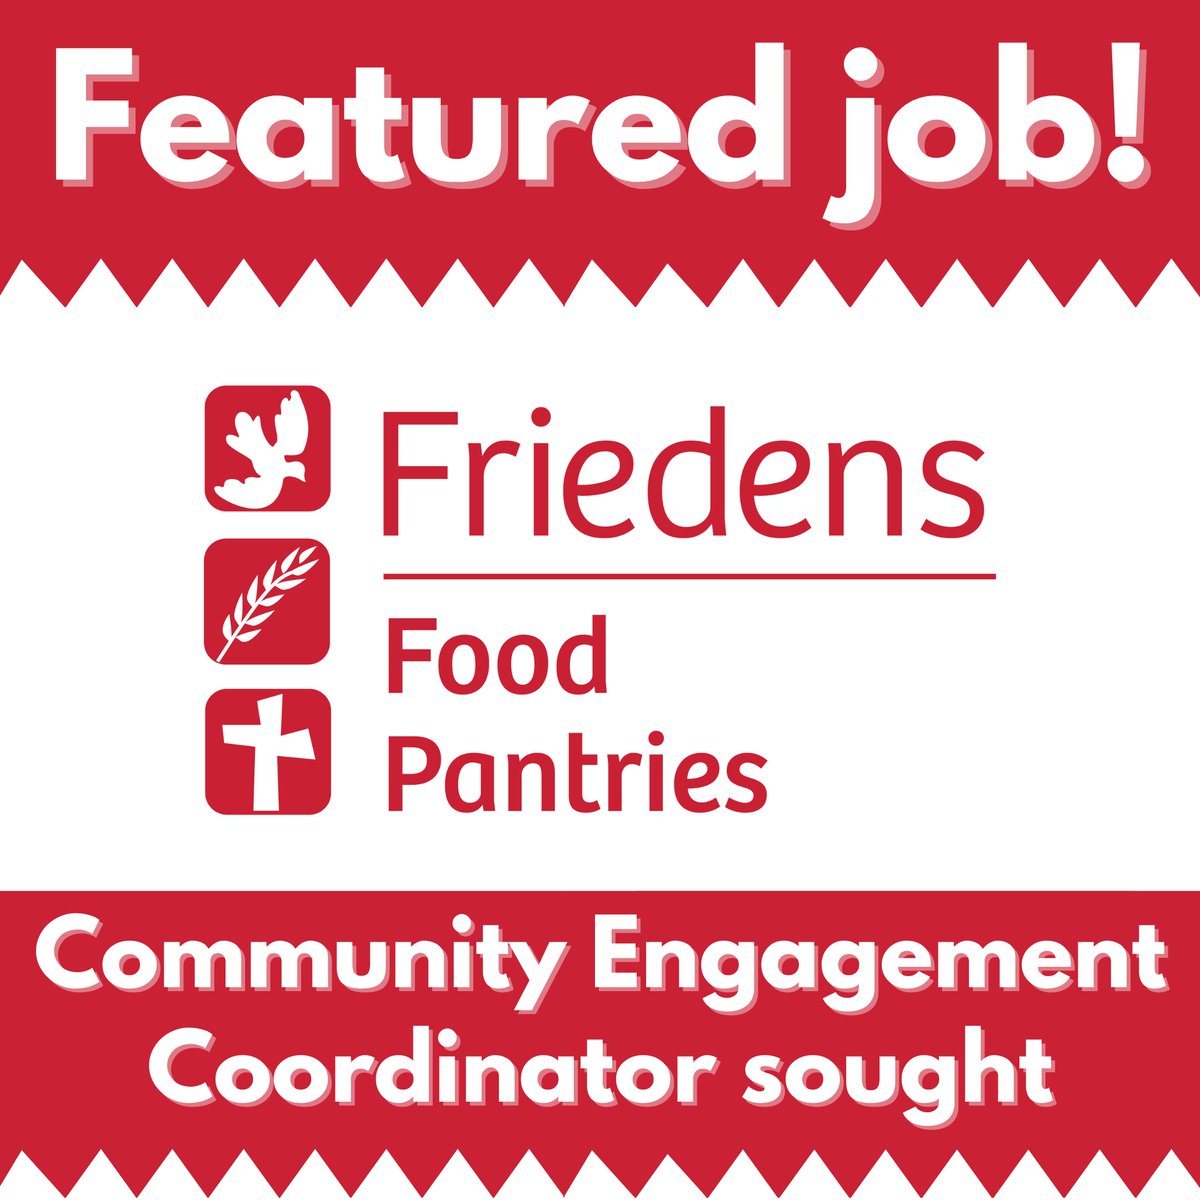 Join @FriedensPantry as their Community Engagement Coordinator (learn more or apply ➡️ tinyurl.com/48yva7zd) in #Milwaukee. $43K-$45K salary—apply now for this important #job opening!

#NonprofitJobs #MKE #MKEjobs #MilwaukeeWI #MilwaukeeJobs #NonprofitManagement #LoVols #WI